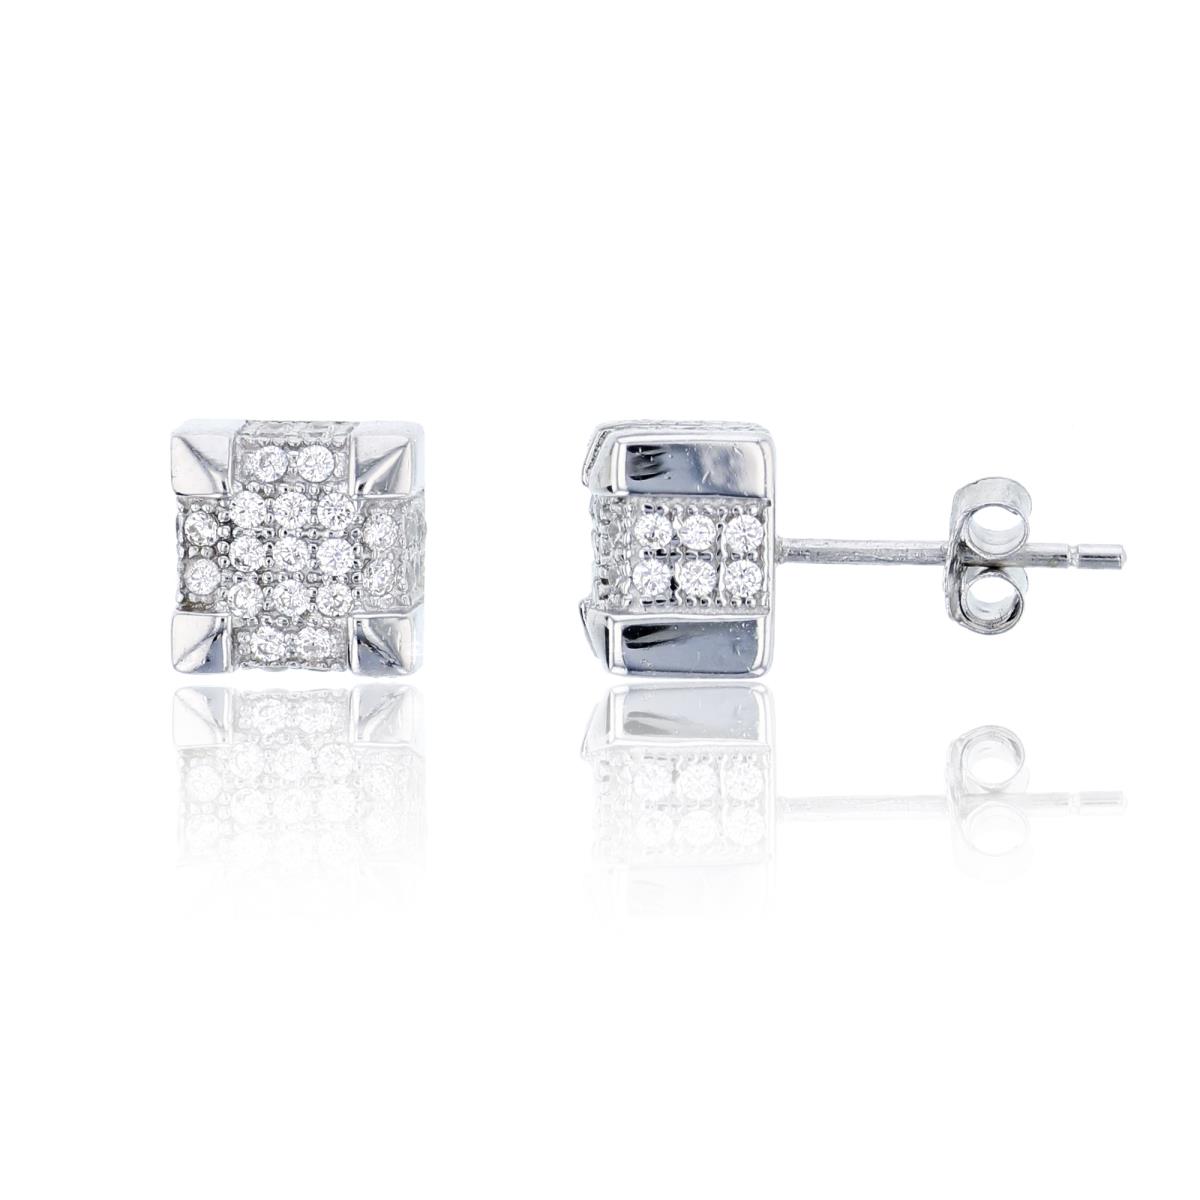 Sterling Silver Rhodium 7x7mm 3D Micropave Square Stud Earring